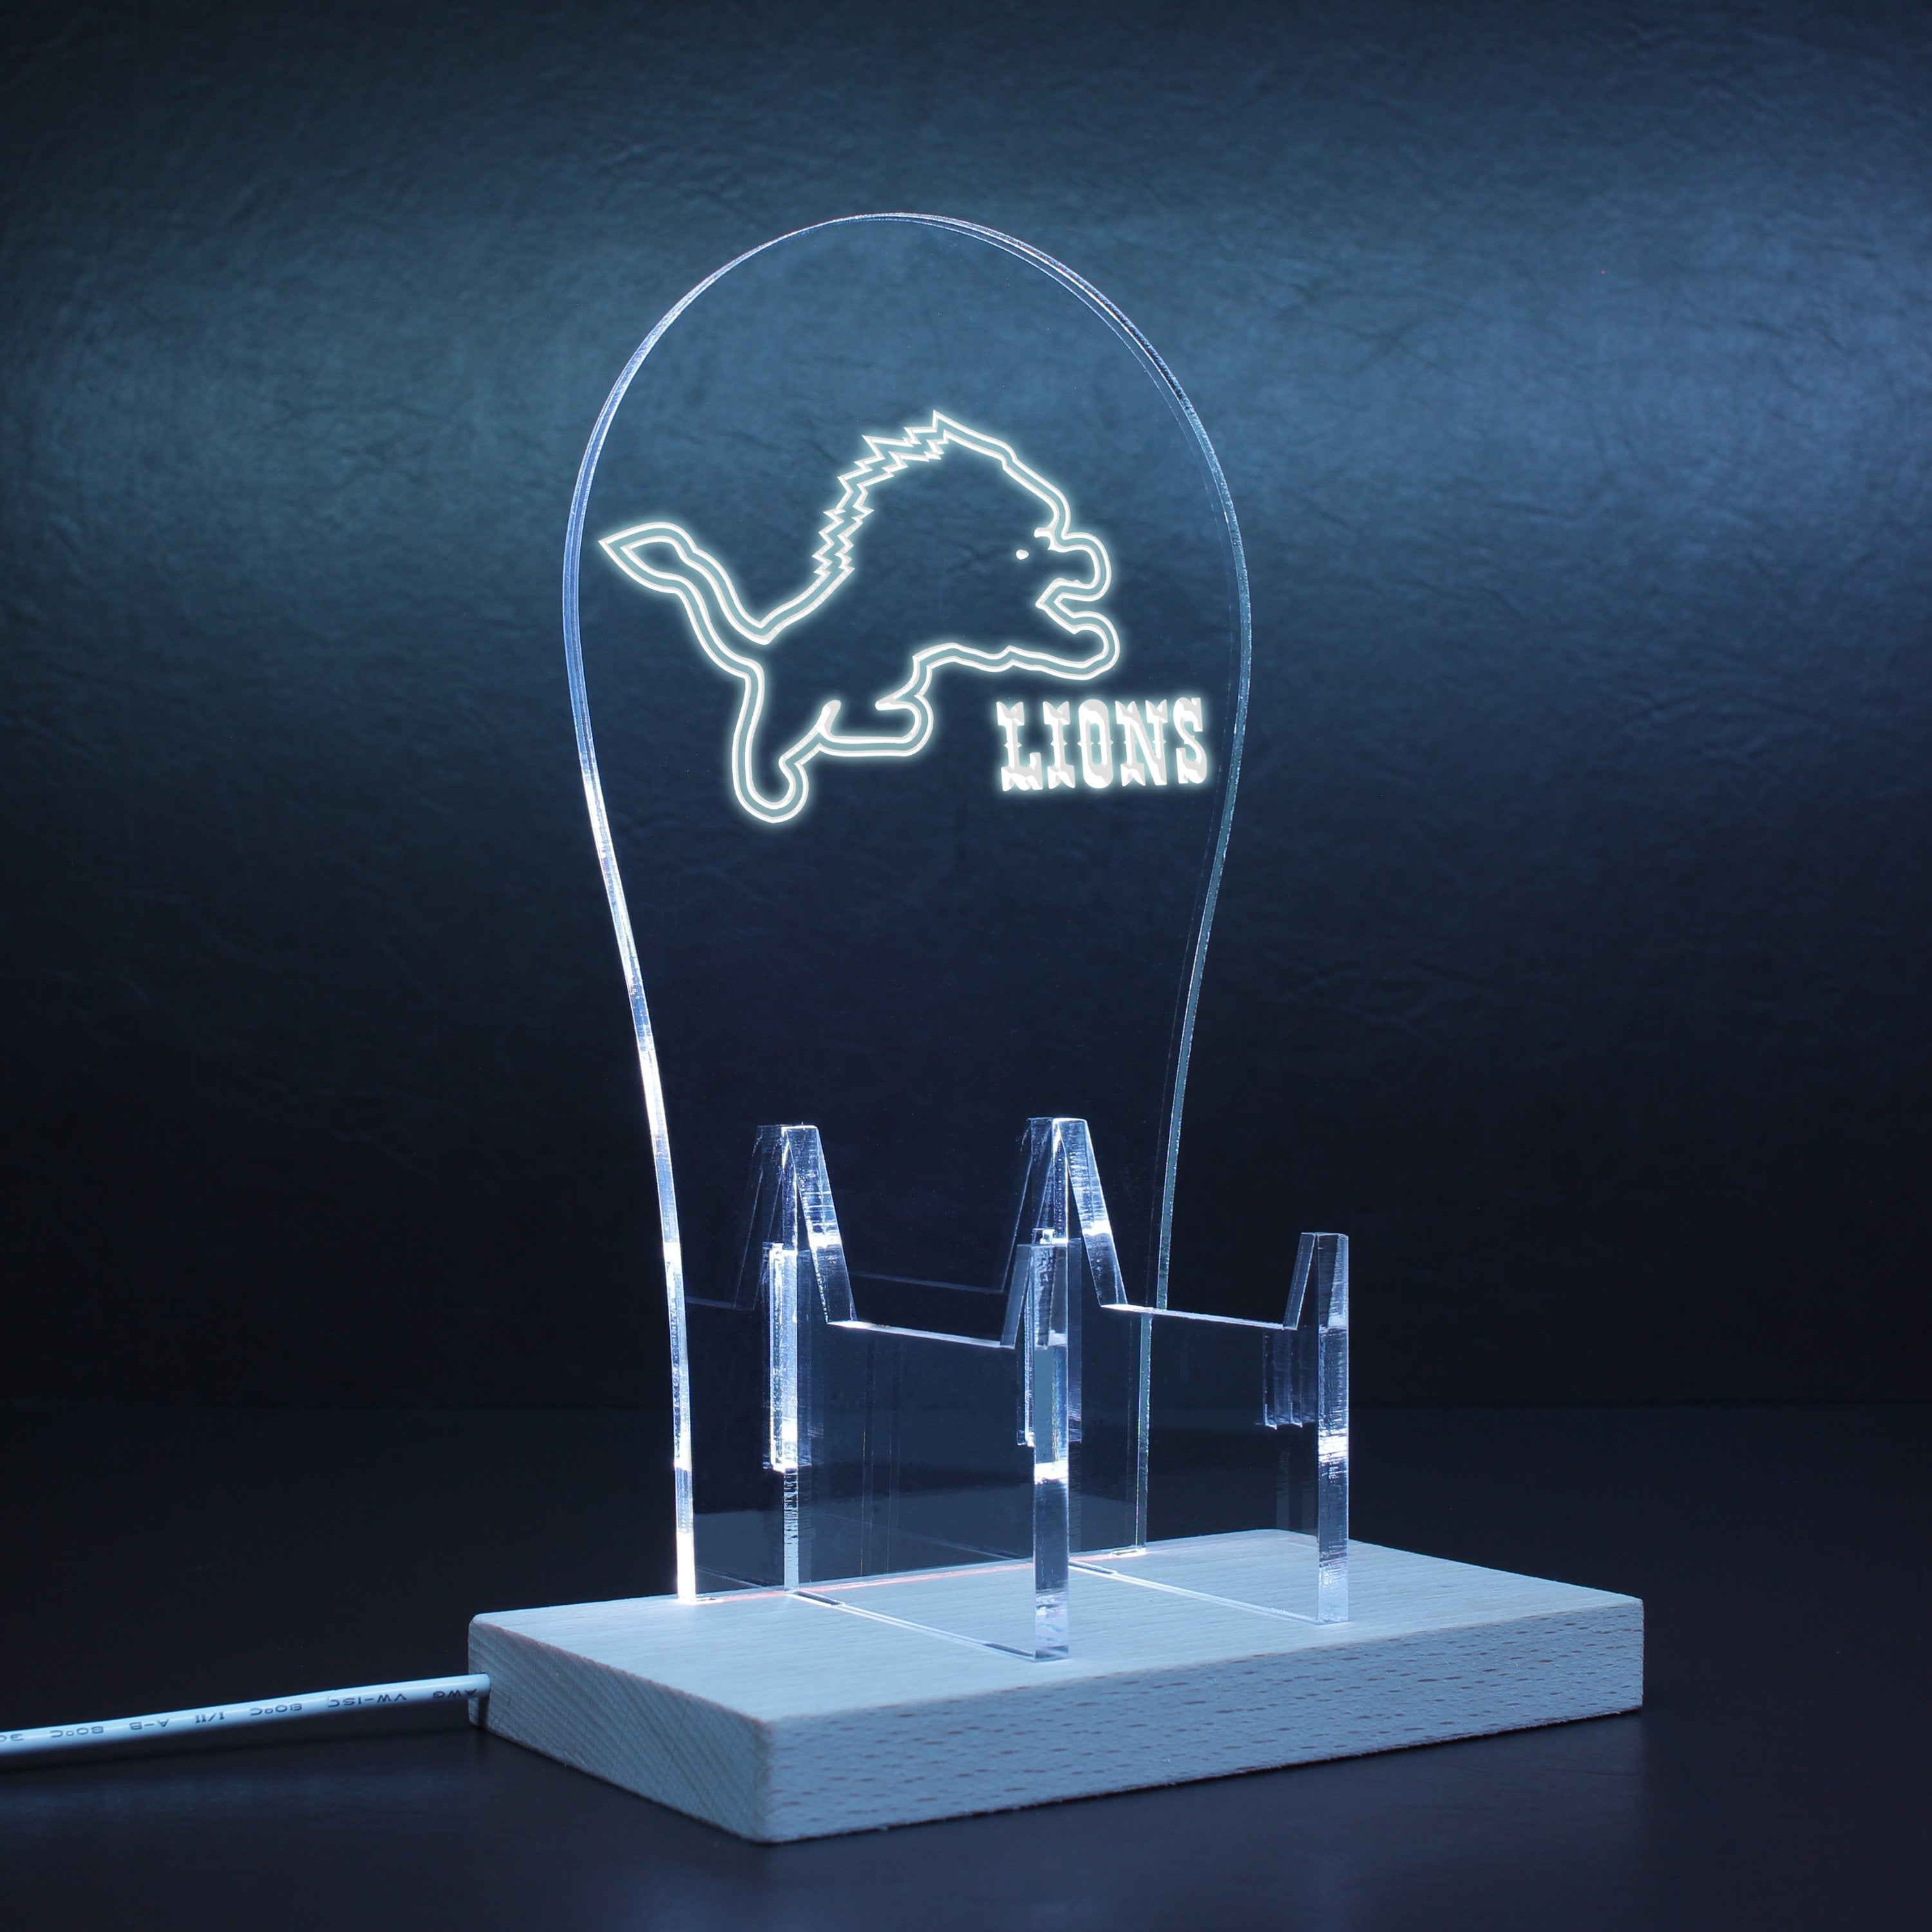 Detroit Lions LED Gaming Headset Controller Stand